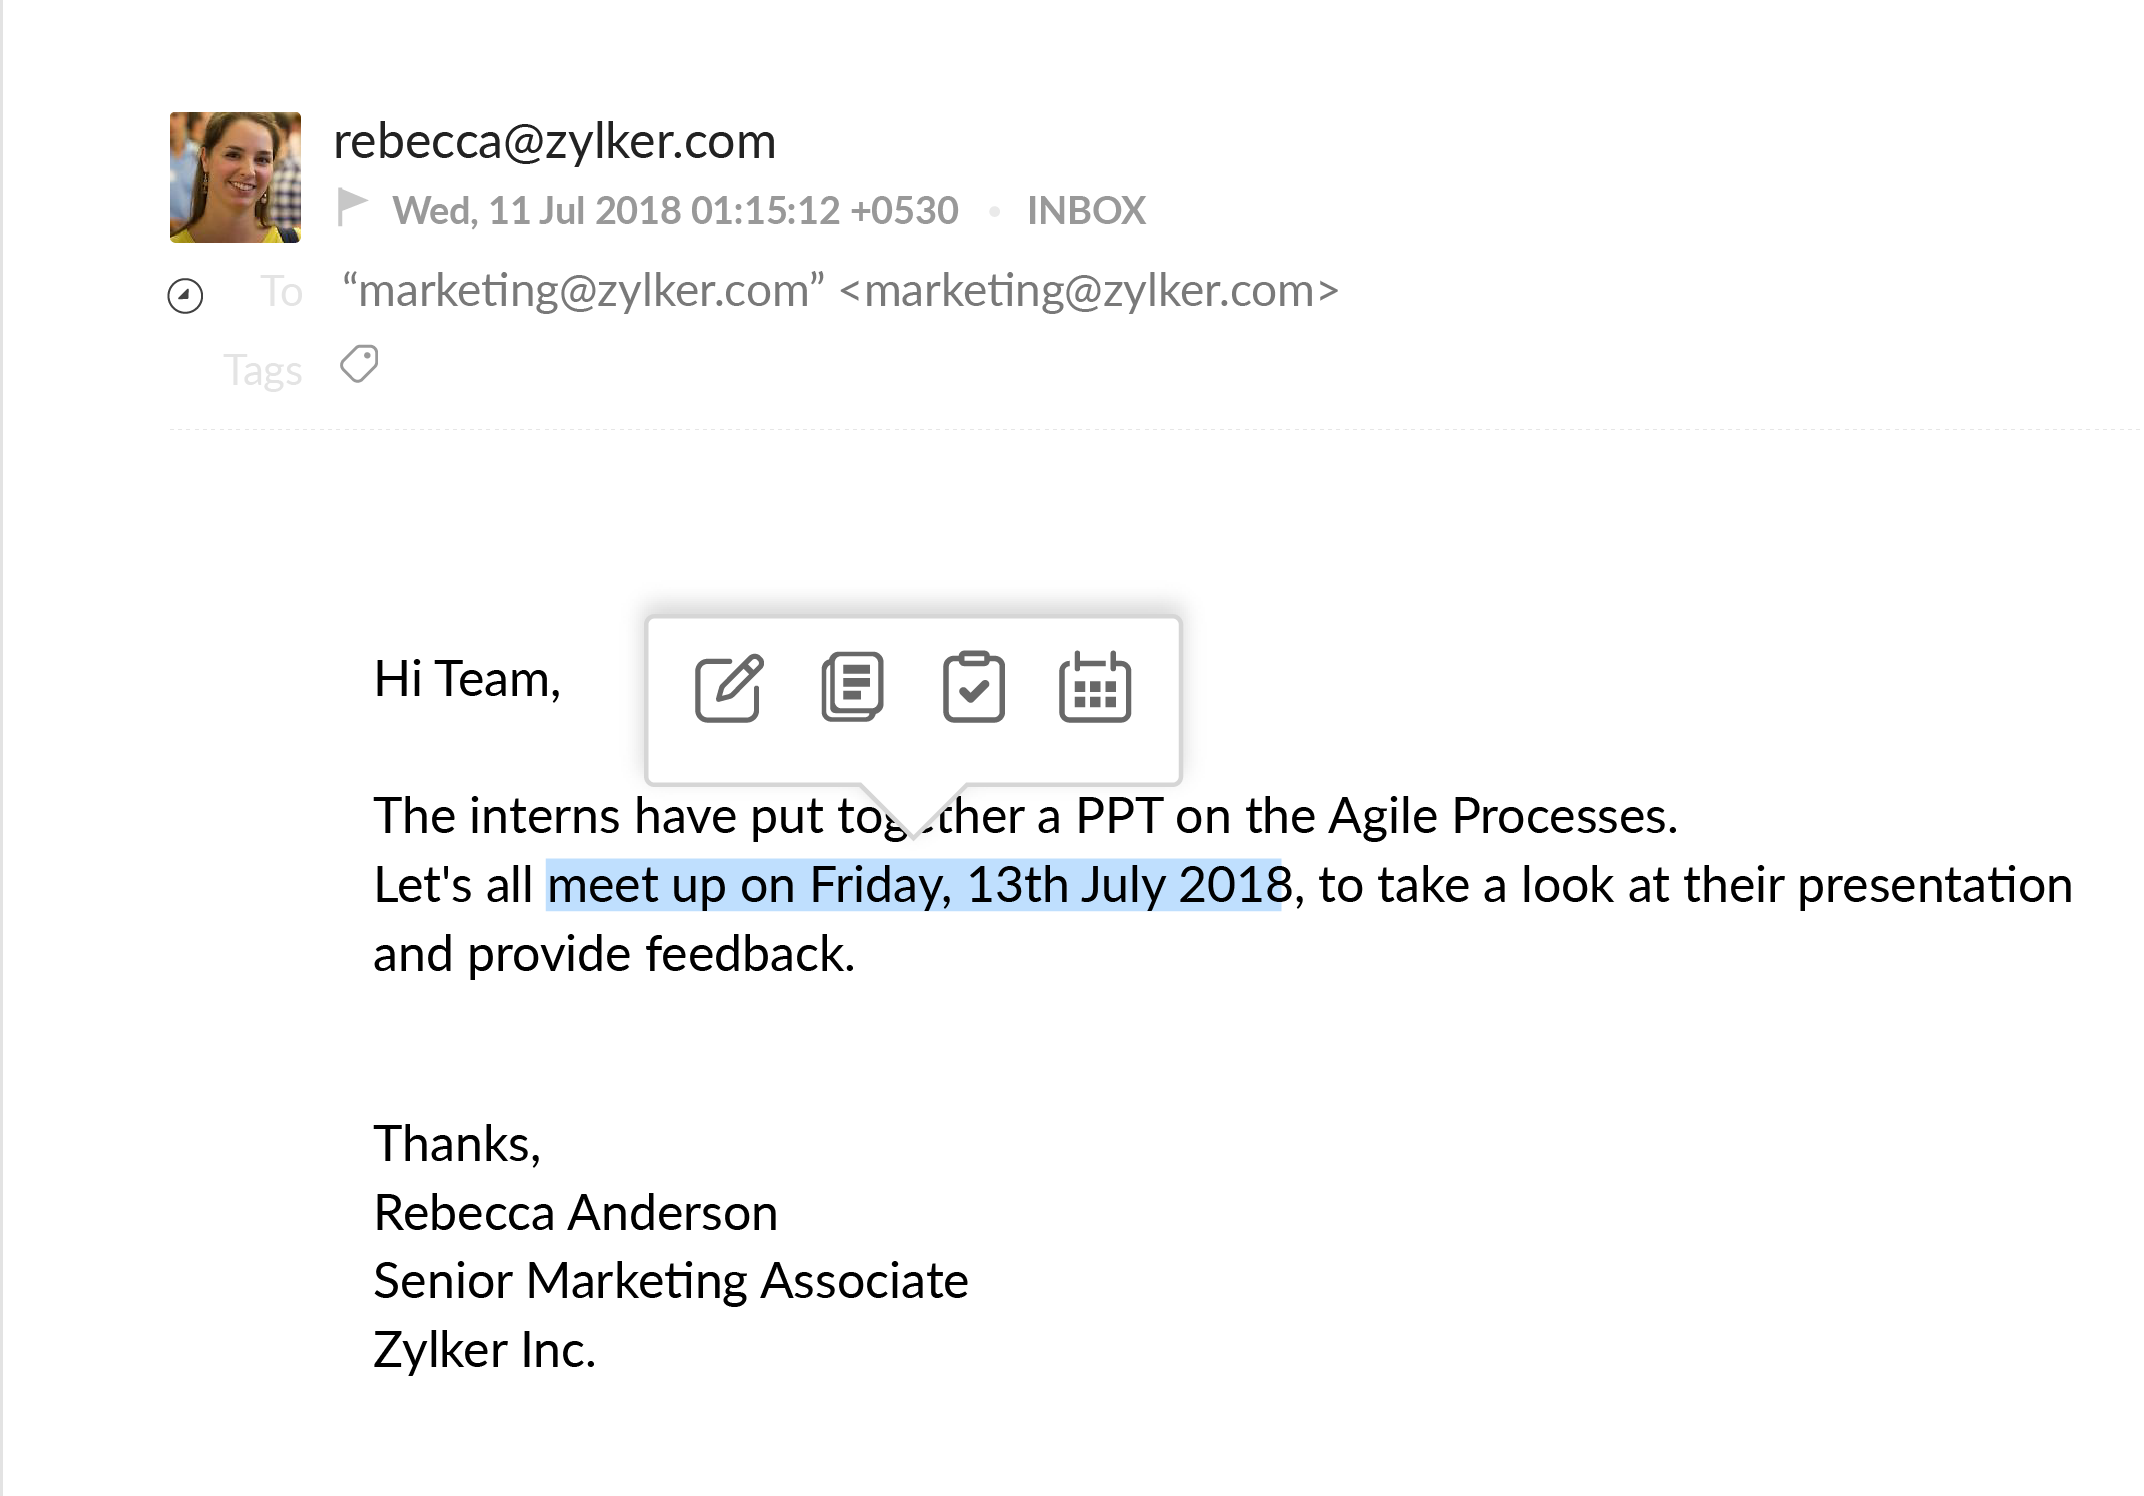 Mail integration with Calendar